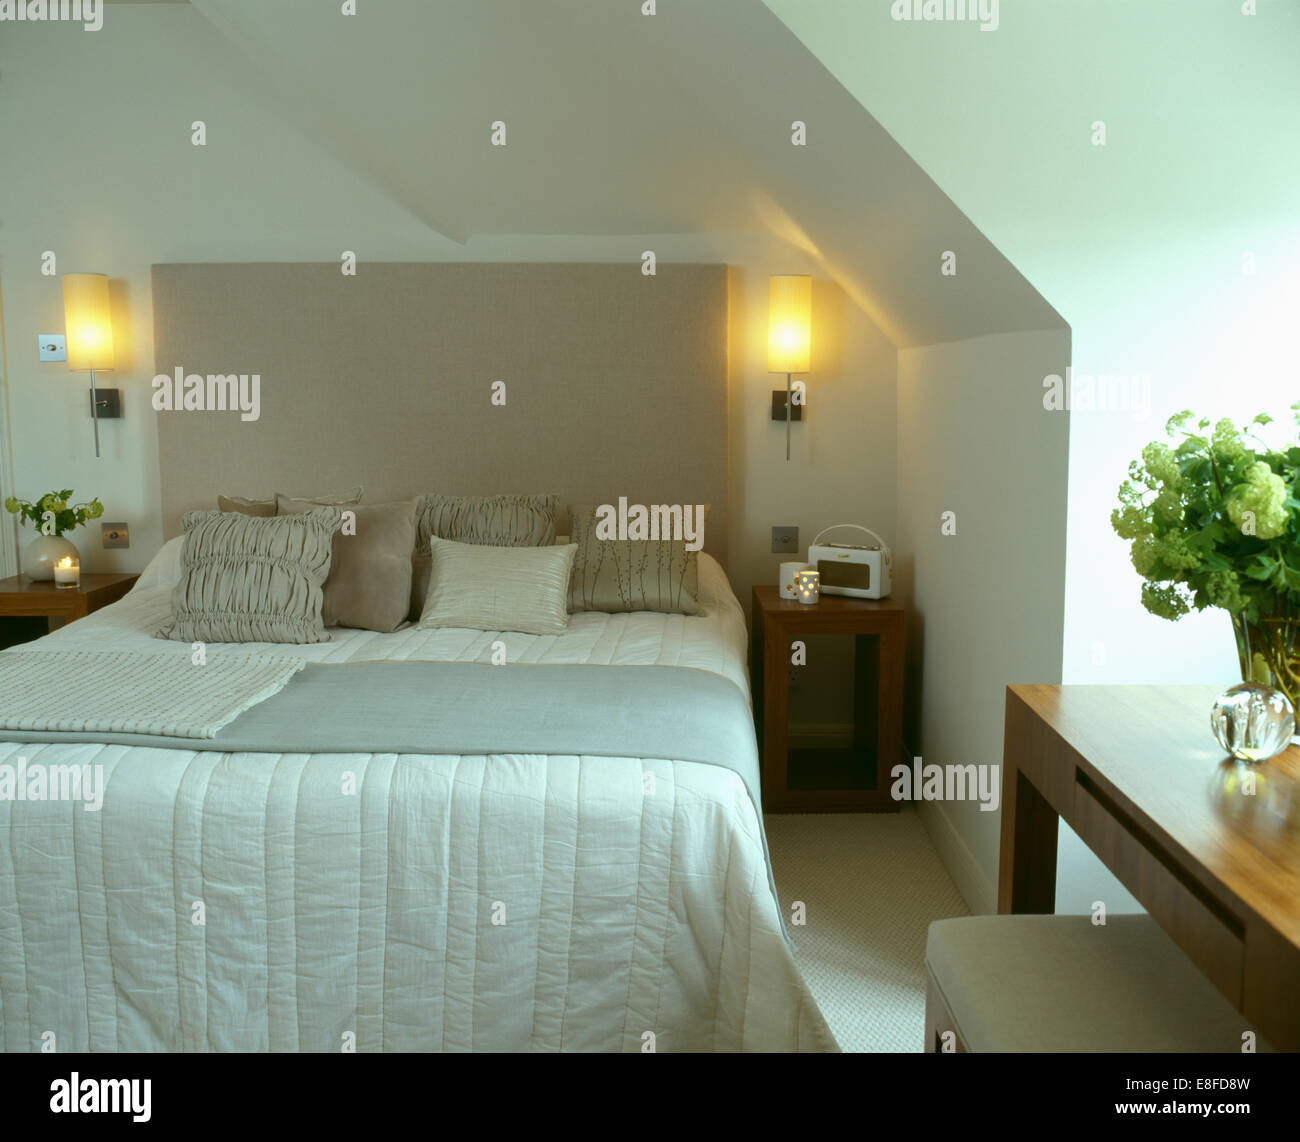 Lighted Wall Lights On Either Side Of Bed With Upholstered Head